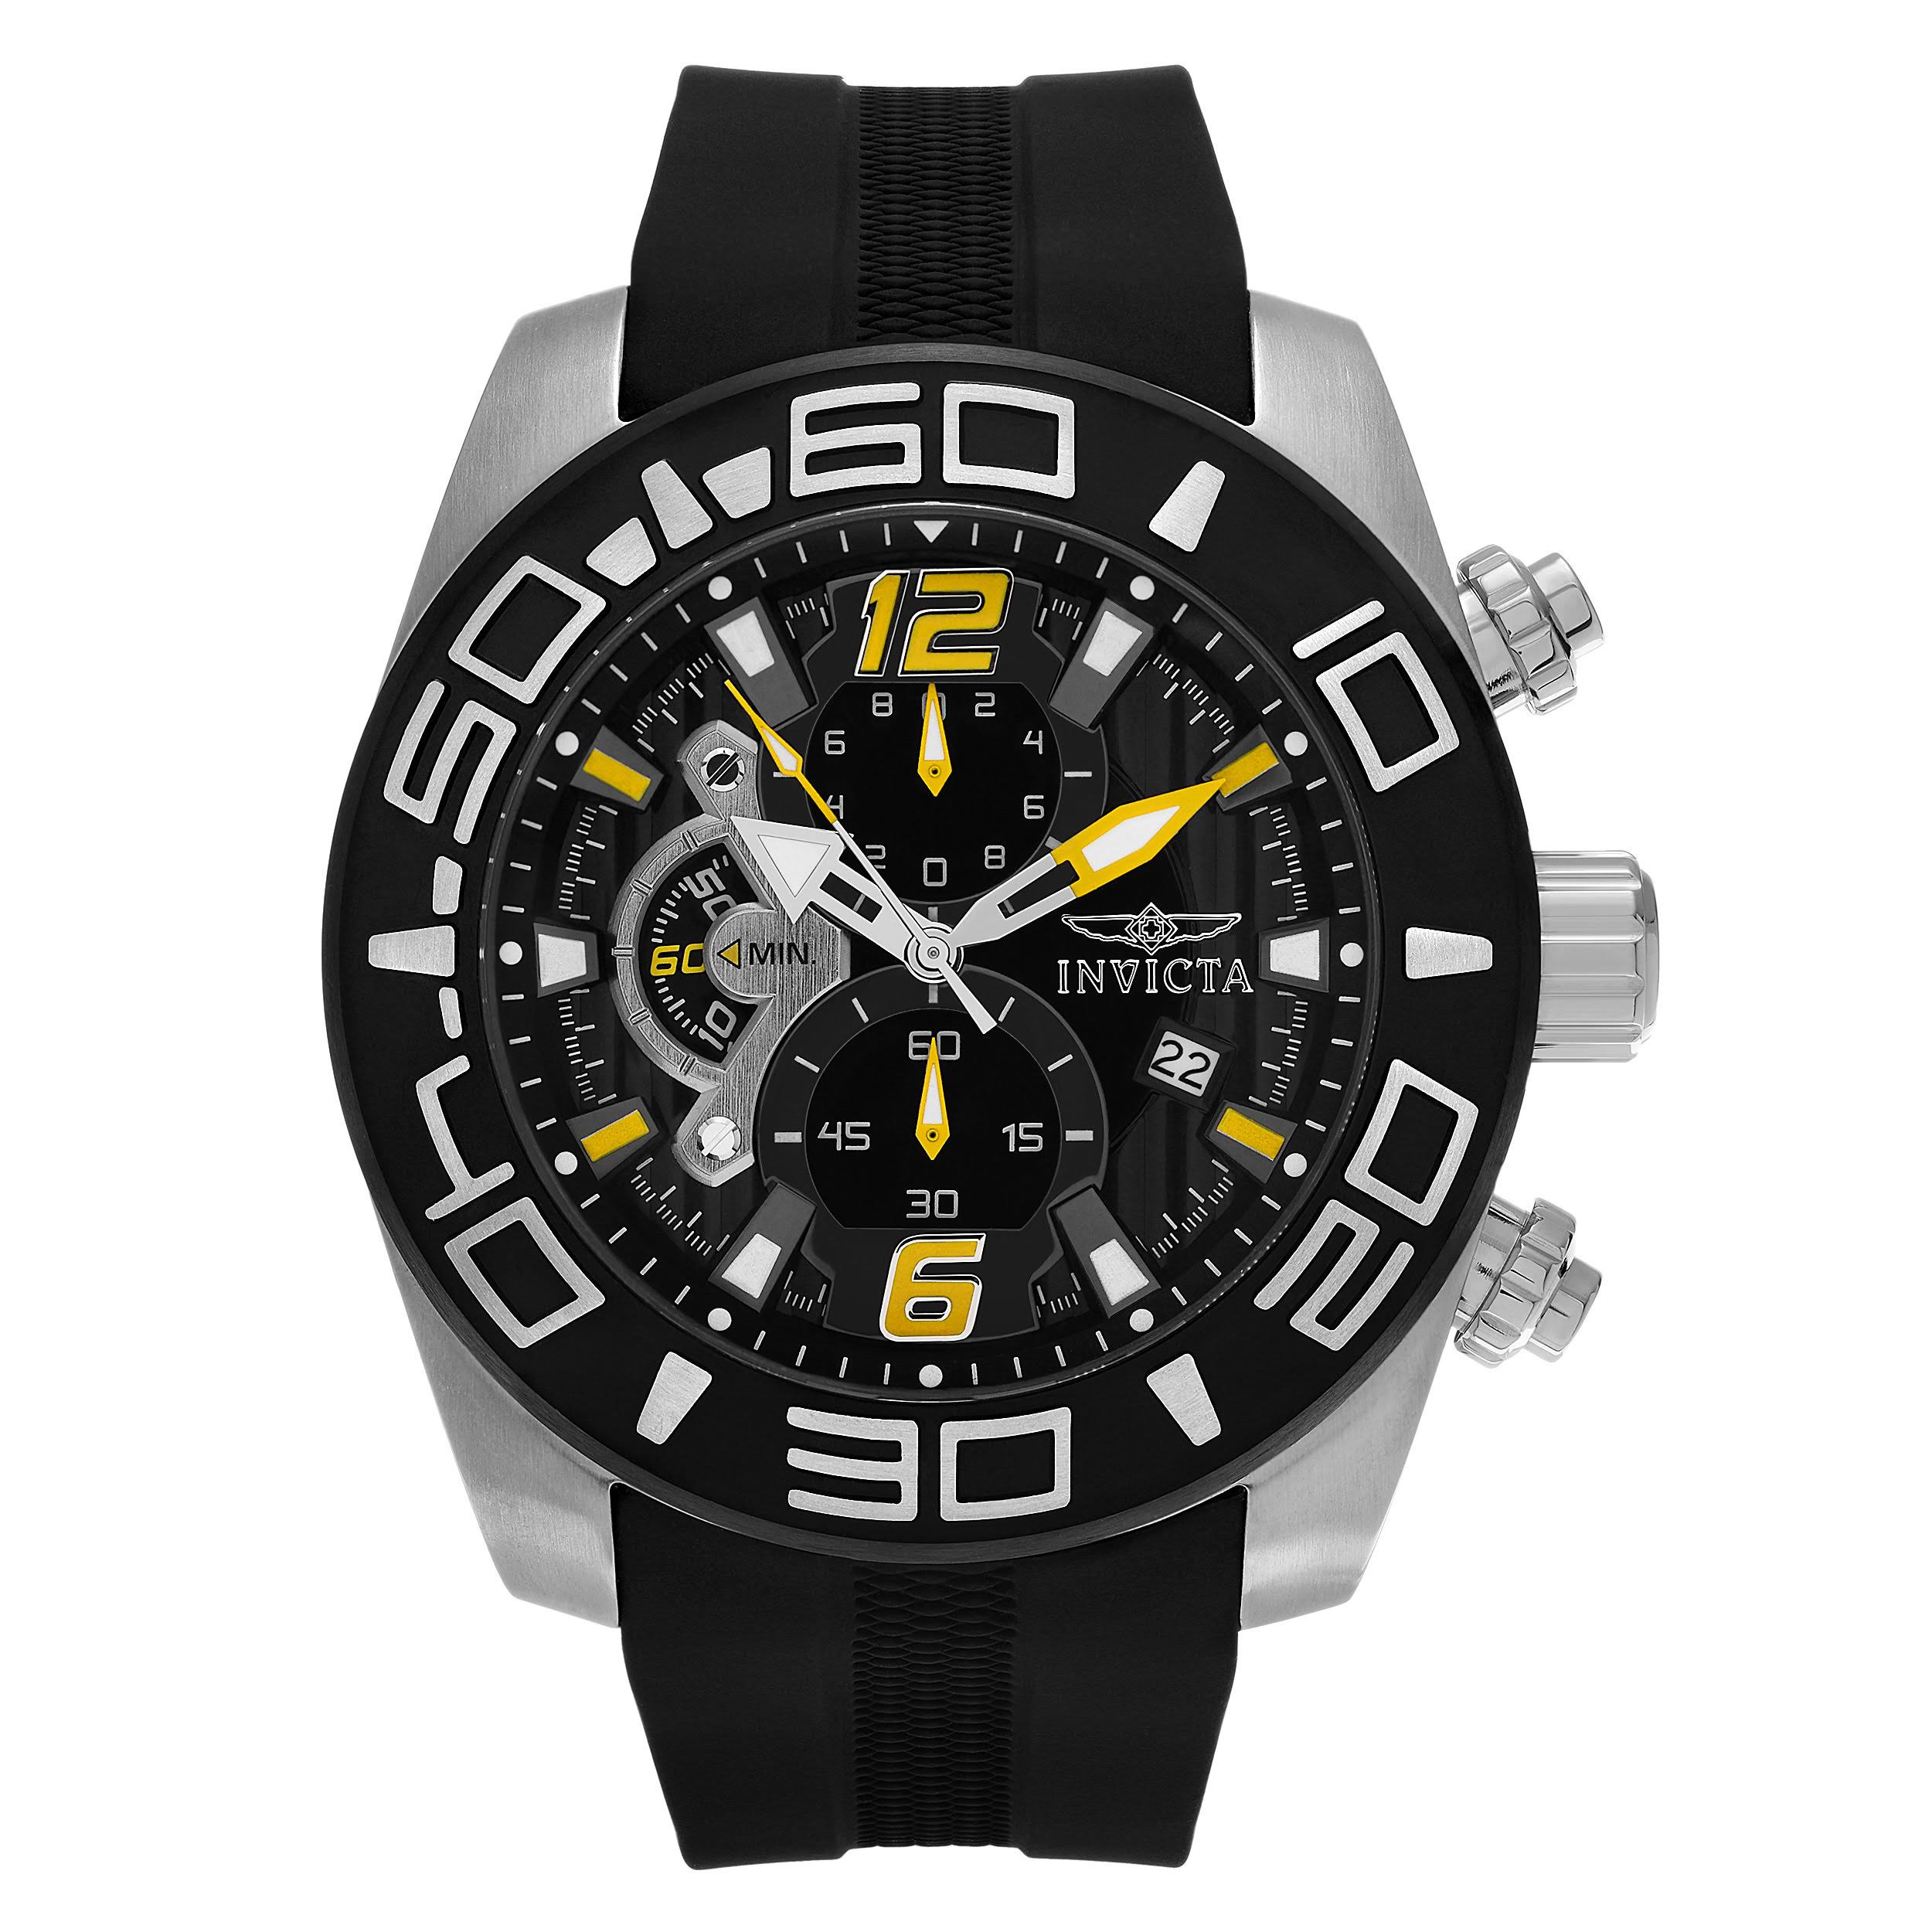 Invicta Men's 'Pro Diver' Quartz Stainless Steel and Silicone Casual Watch, Color:Black (Model: 22809)